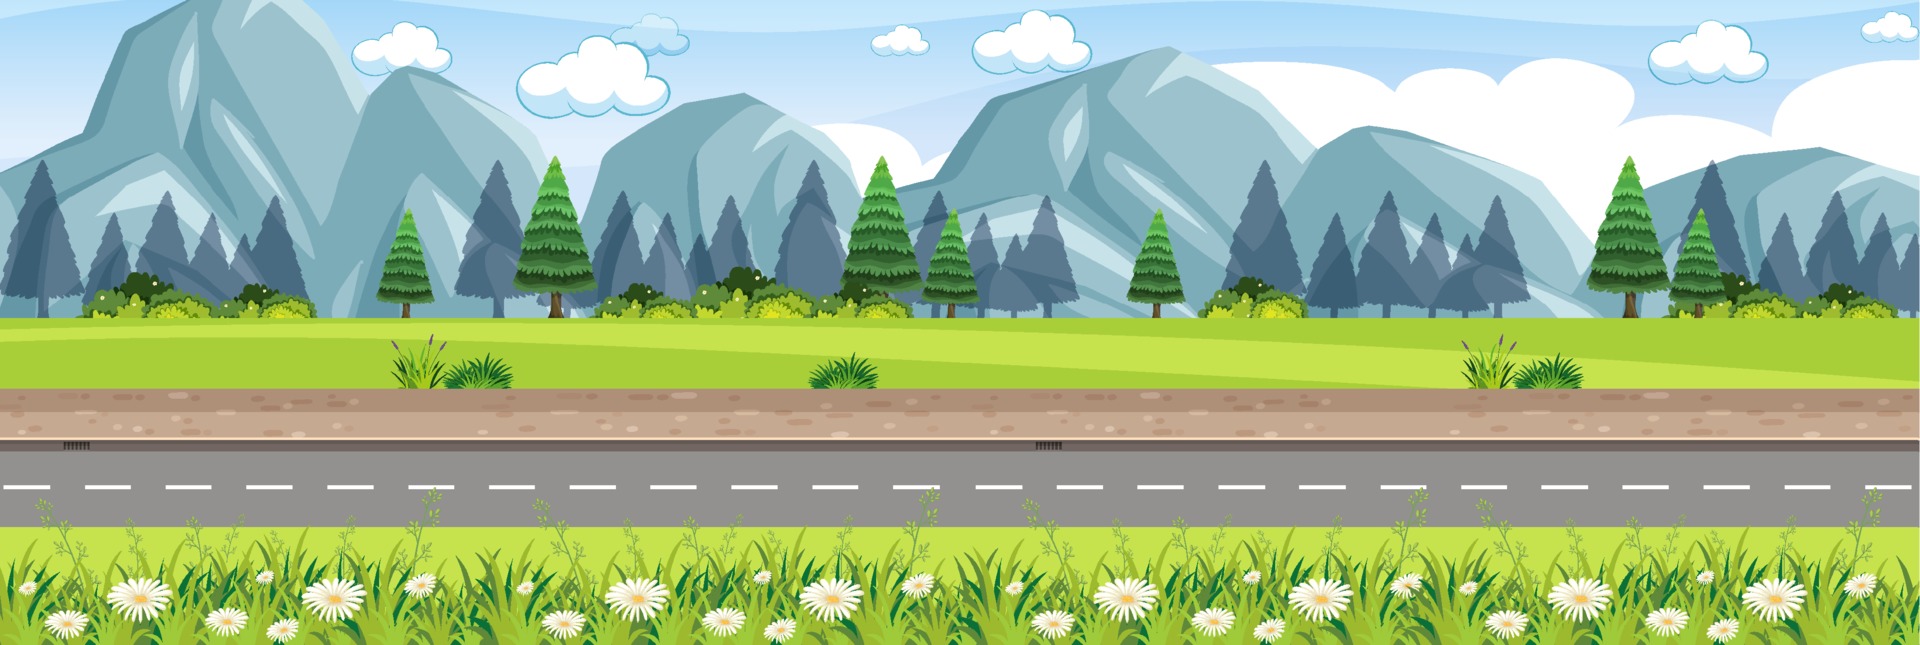 Cartoon Road Vector Art Icons And Graphics For Free Download